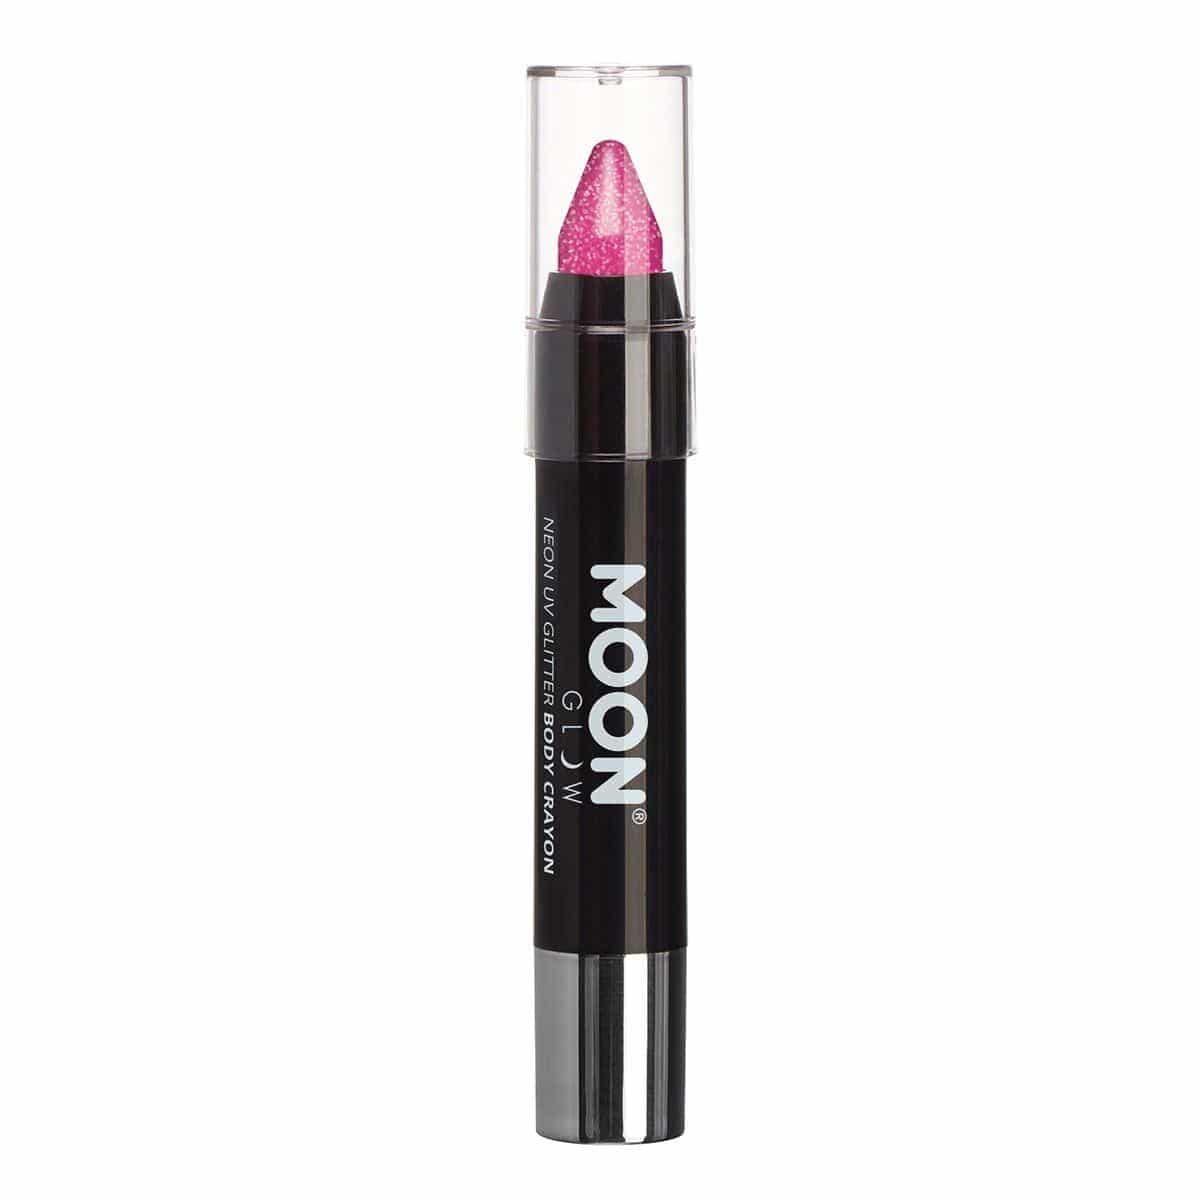 Buy Costume Accessories Moon hot pink glitter UV face & body crayon sold at Party Expert